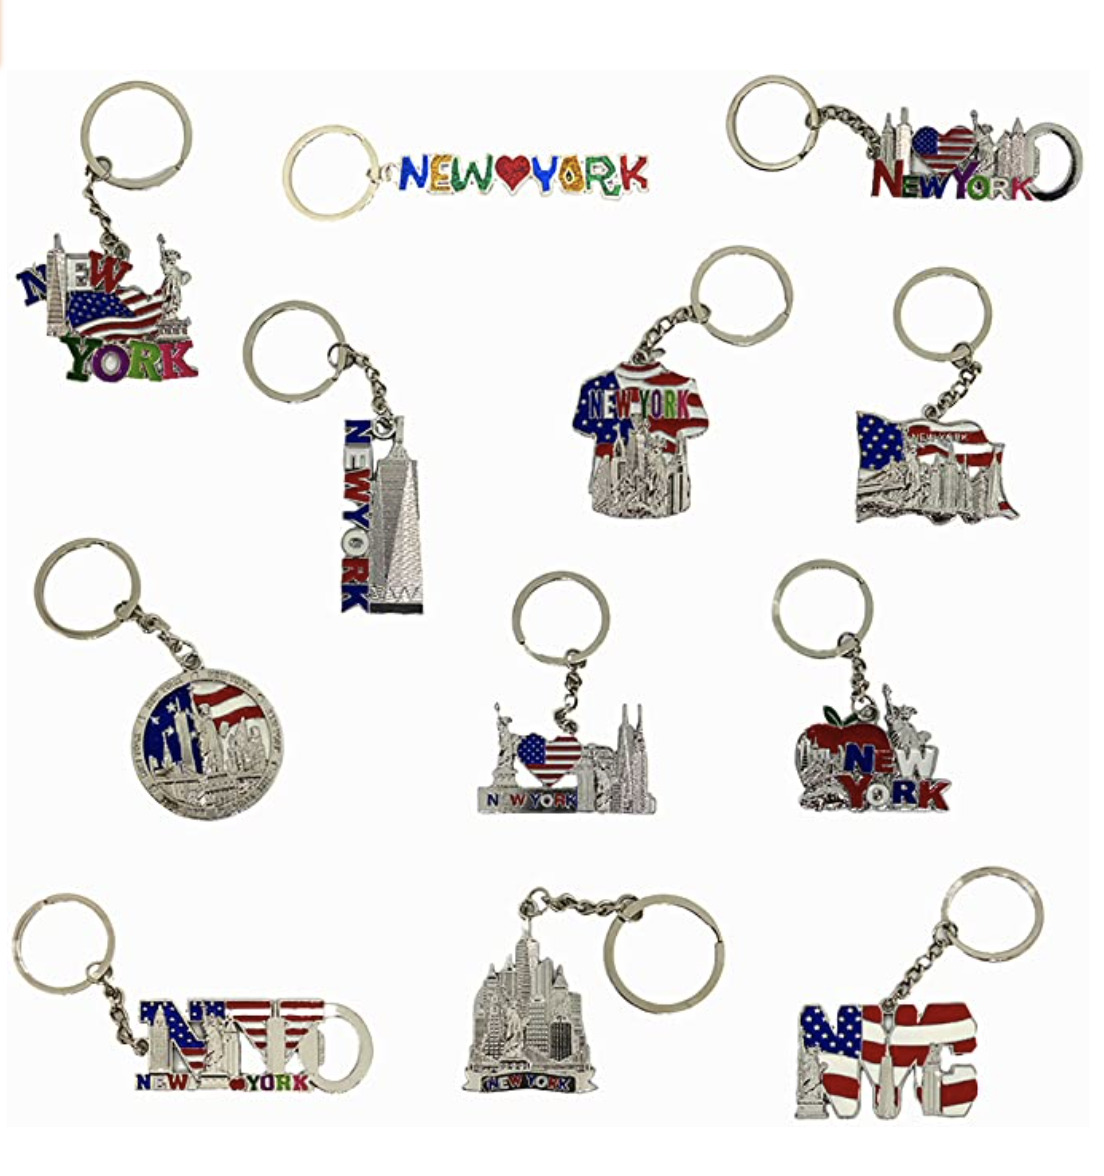 12 Pack New York City Metal Keychains NYC  KeyRing Souvenir Collection, Gift Set